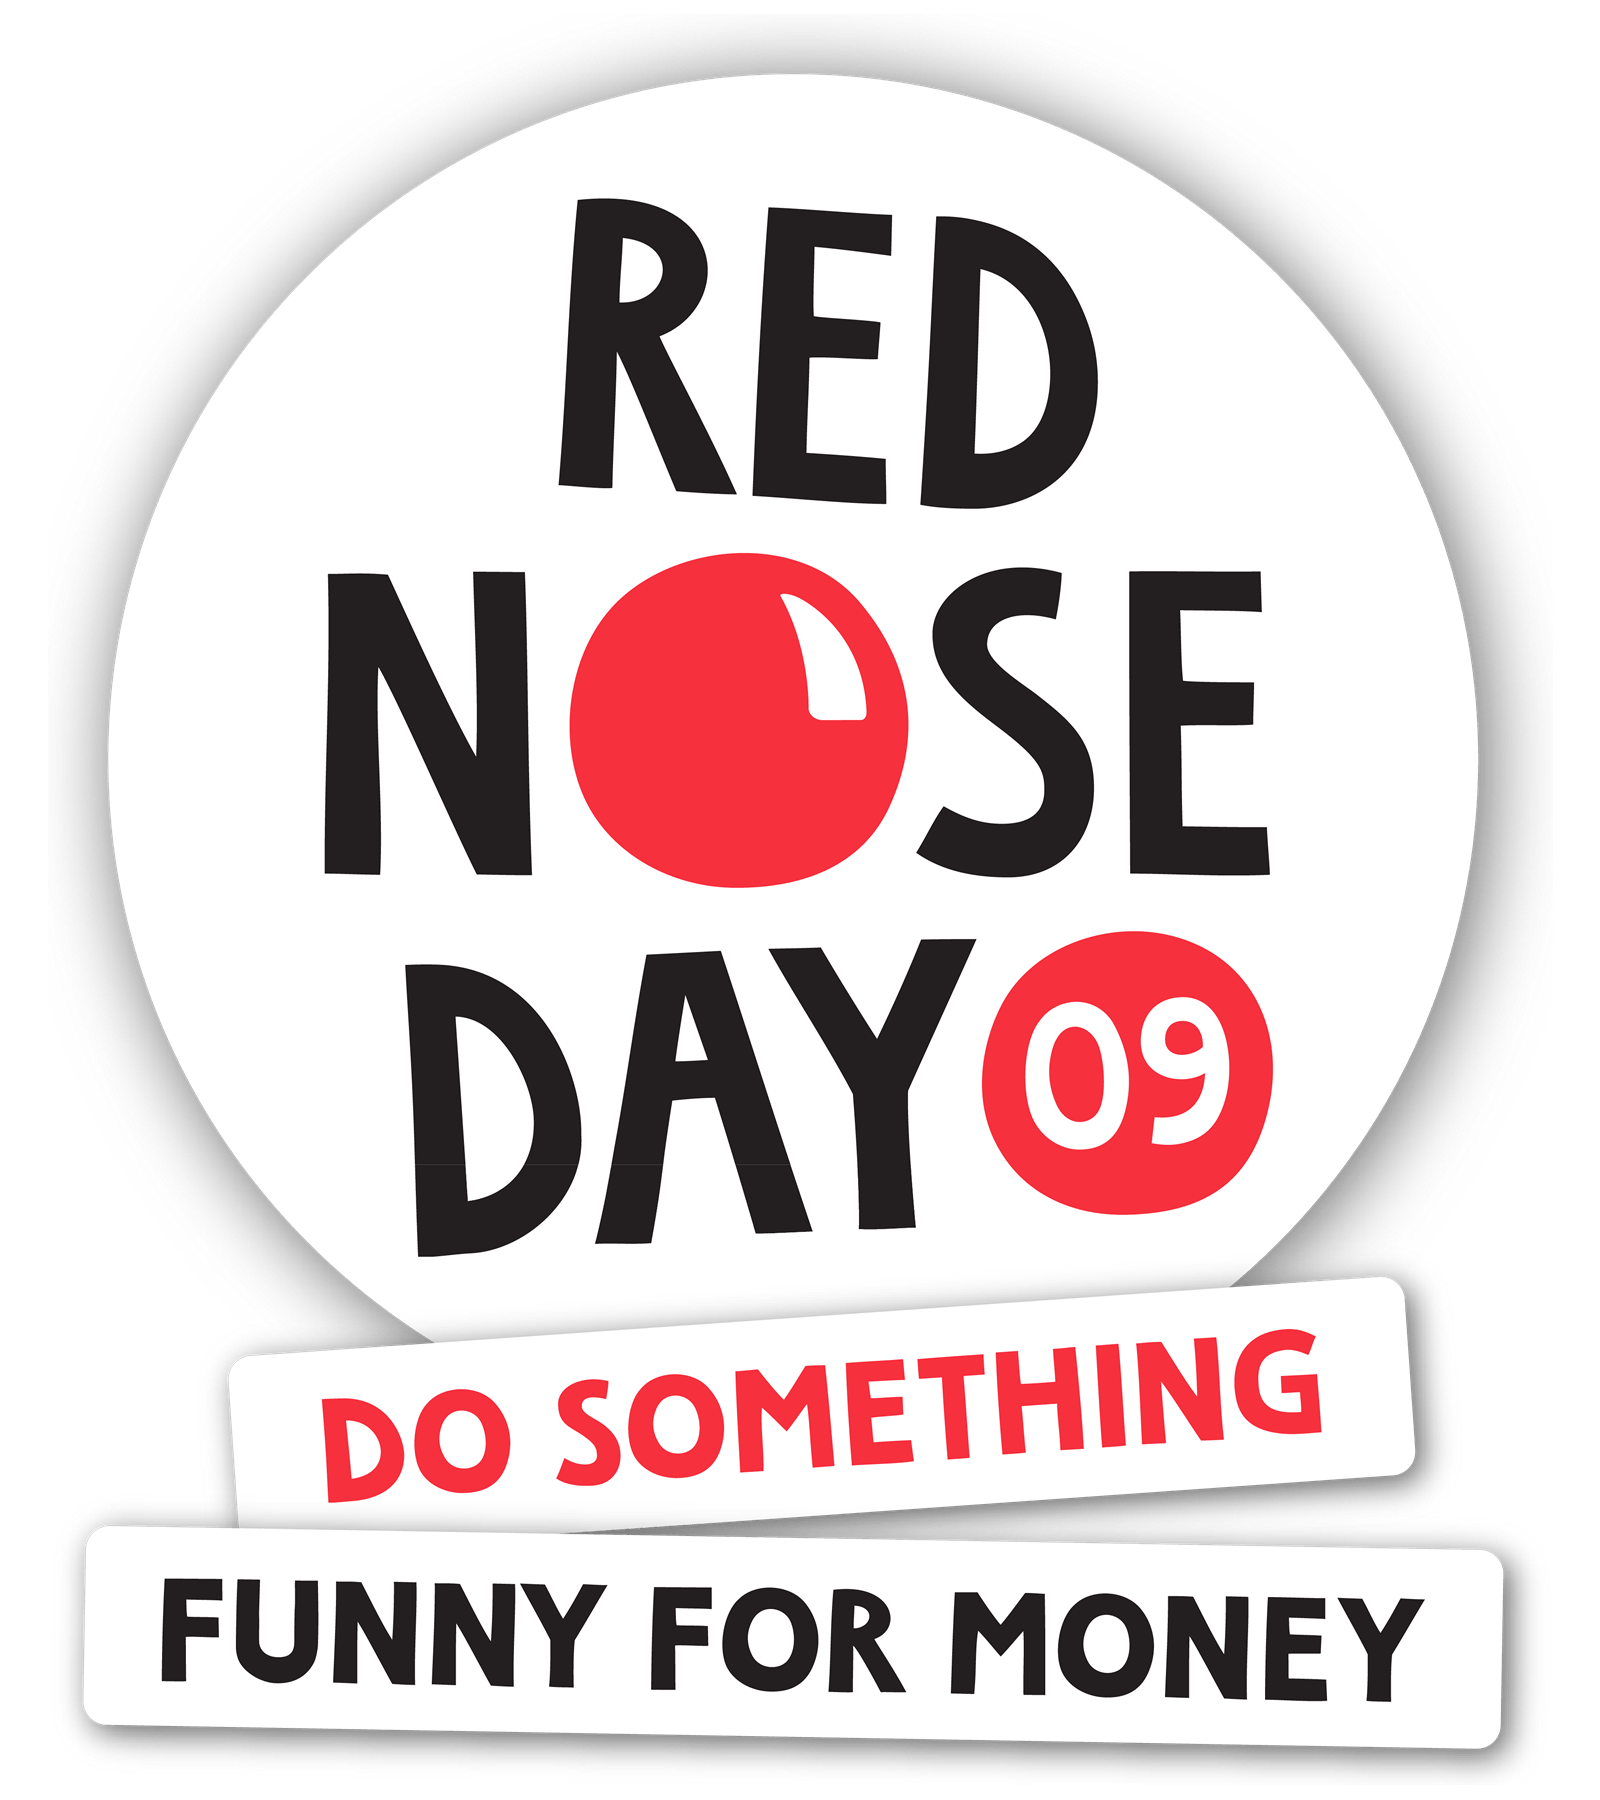 Do Something Funny for Money for Red Nose Day '09